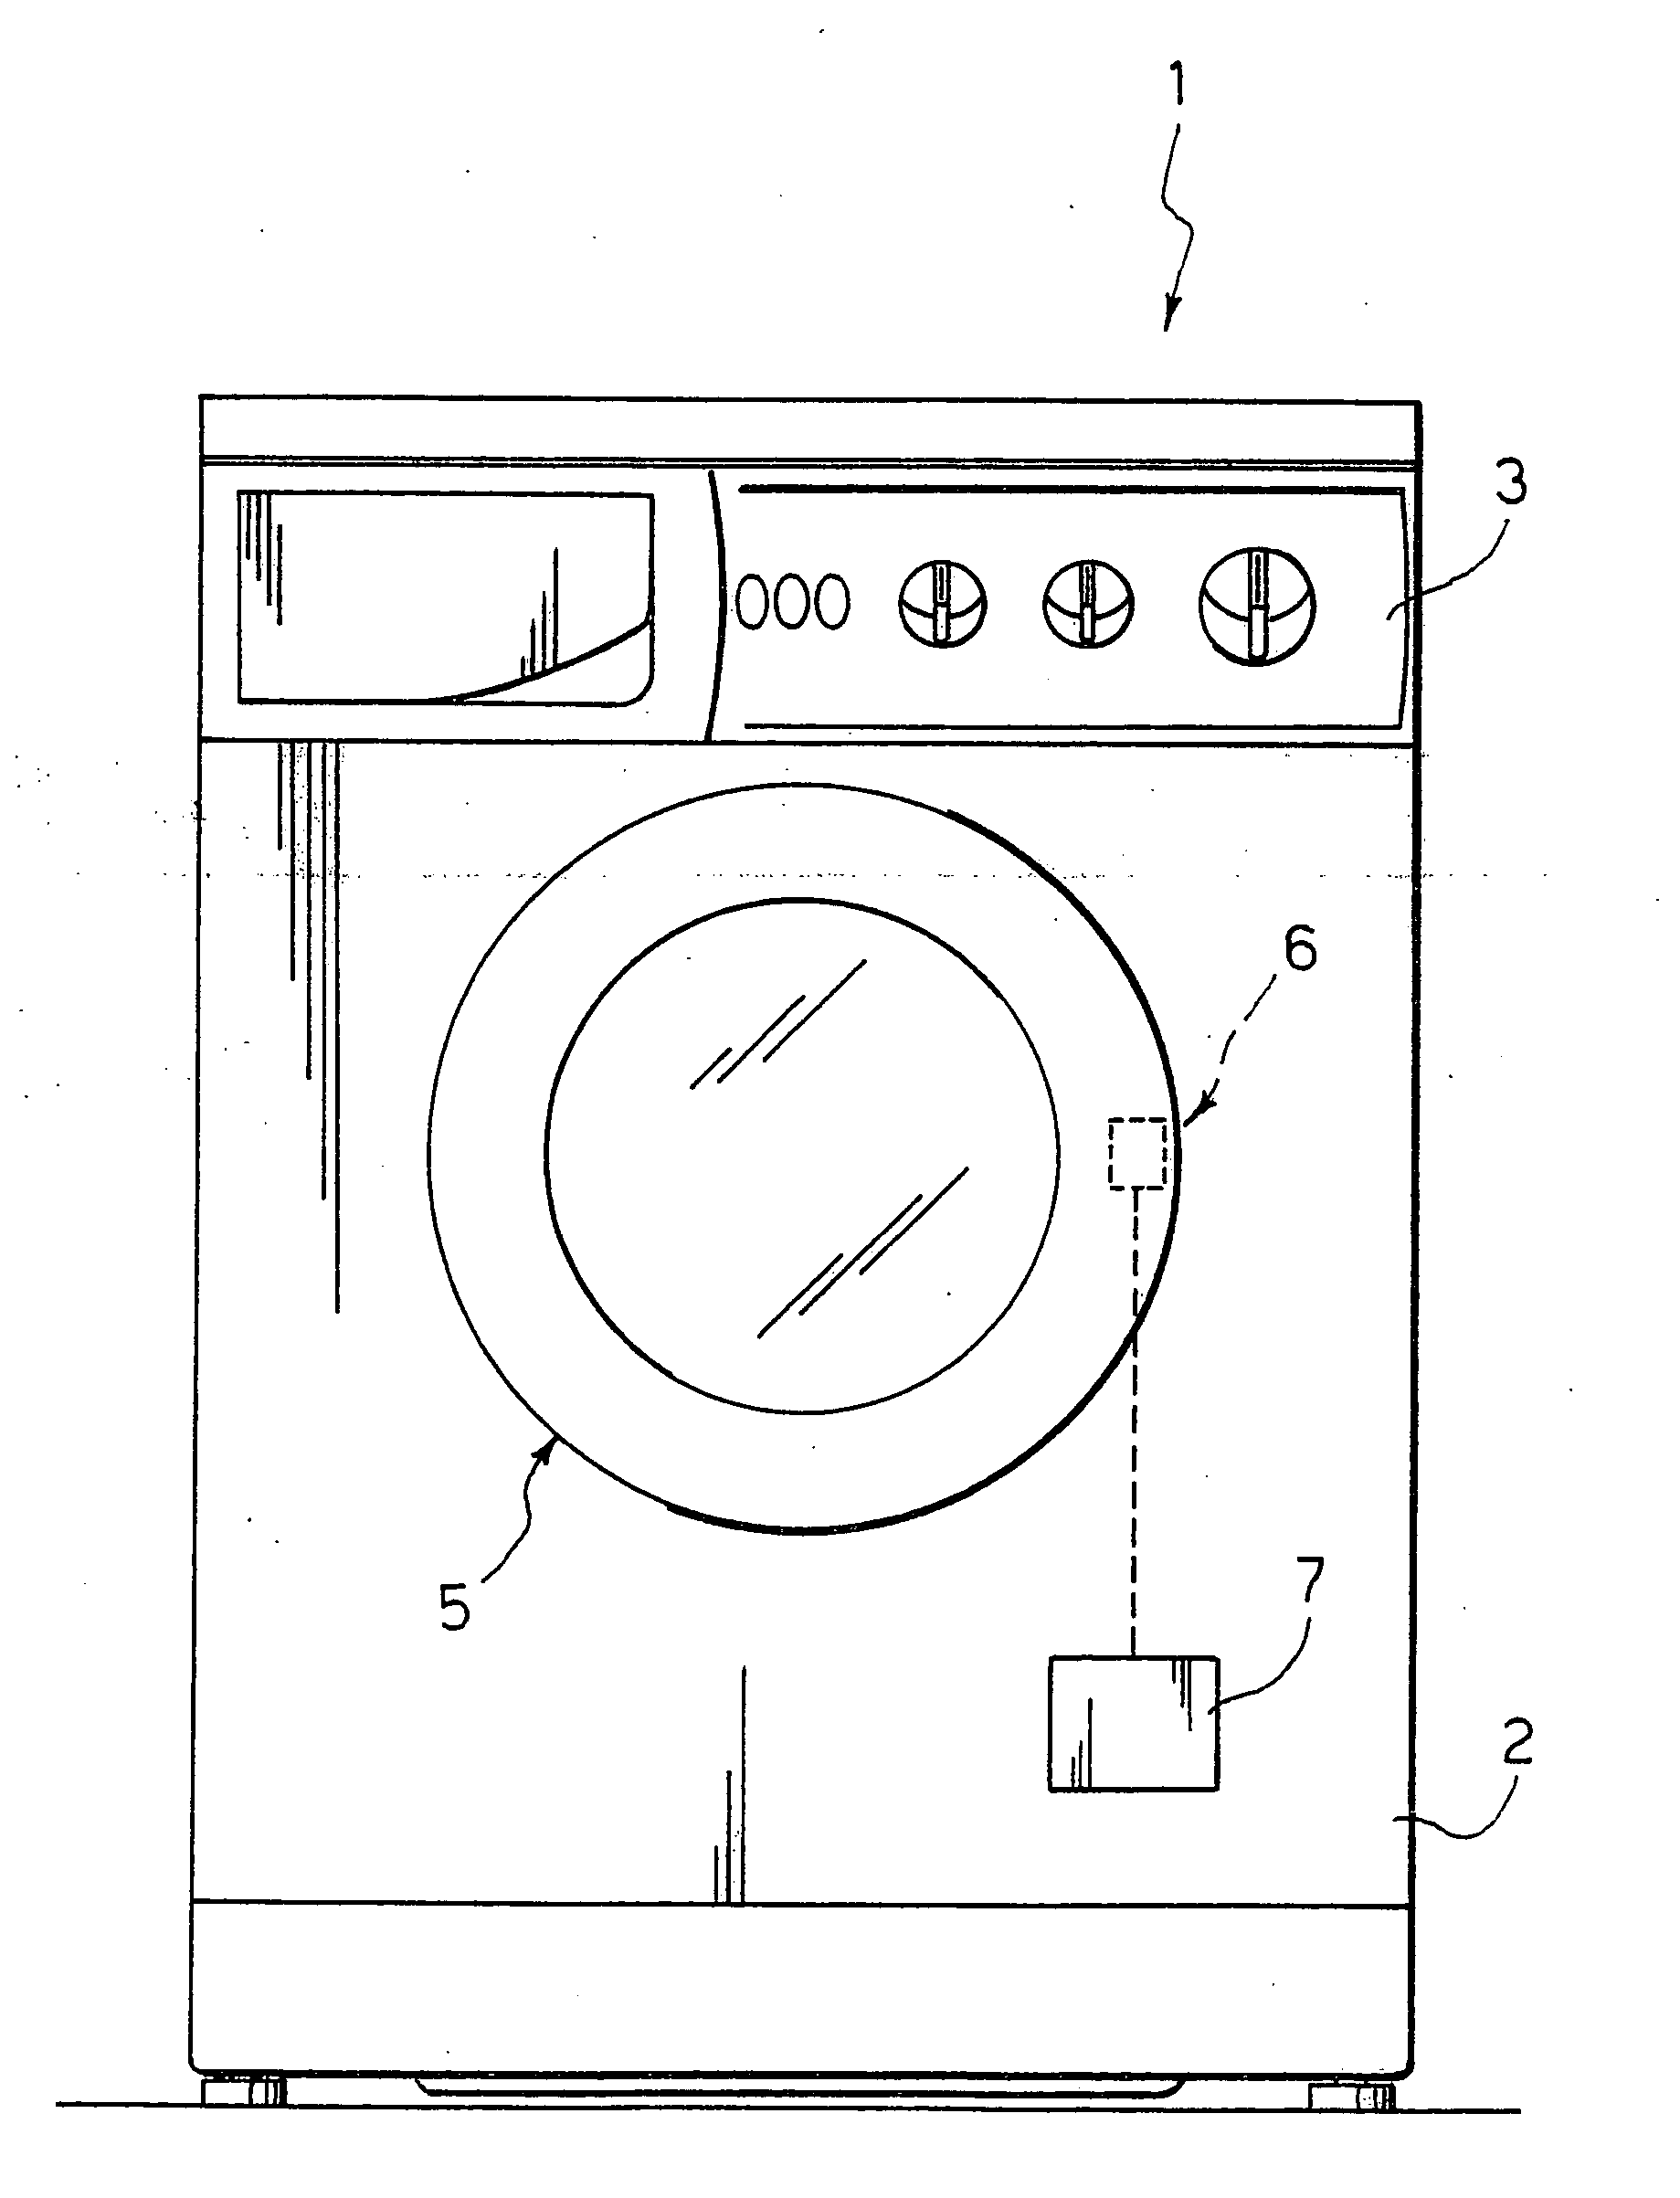 Household appliance, namely a machine for washing and/or drying laundry, with a door block/release device that can be actuated electrically